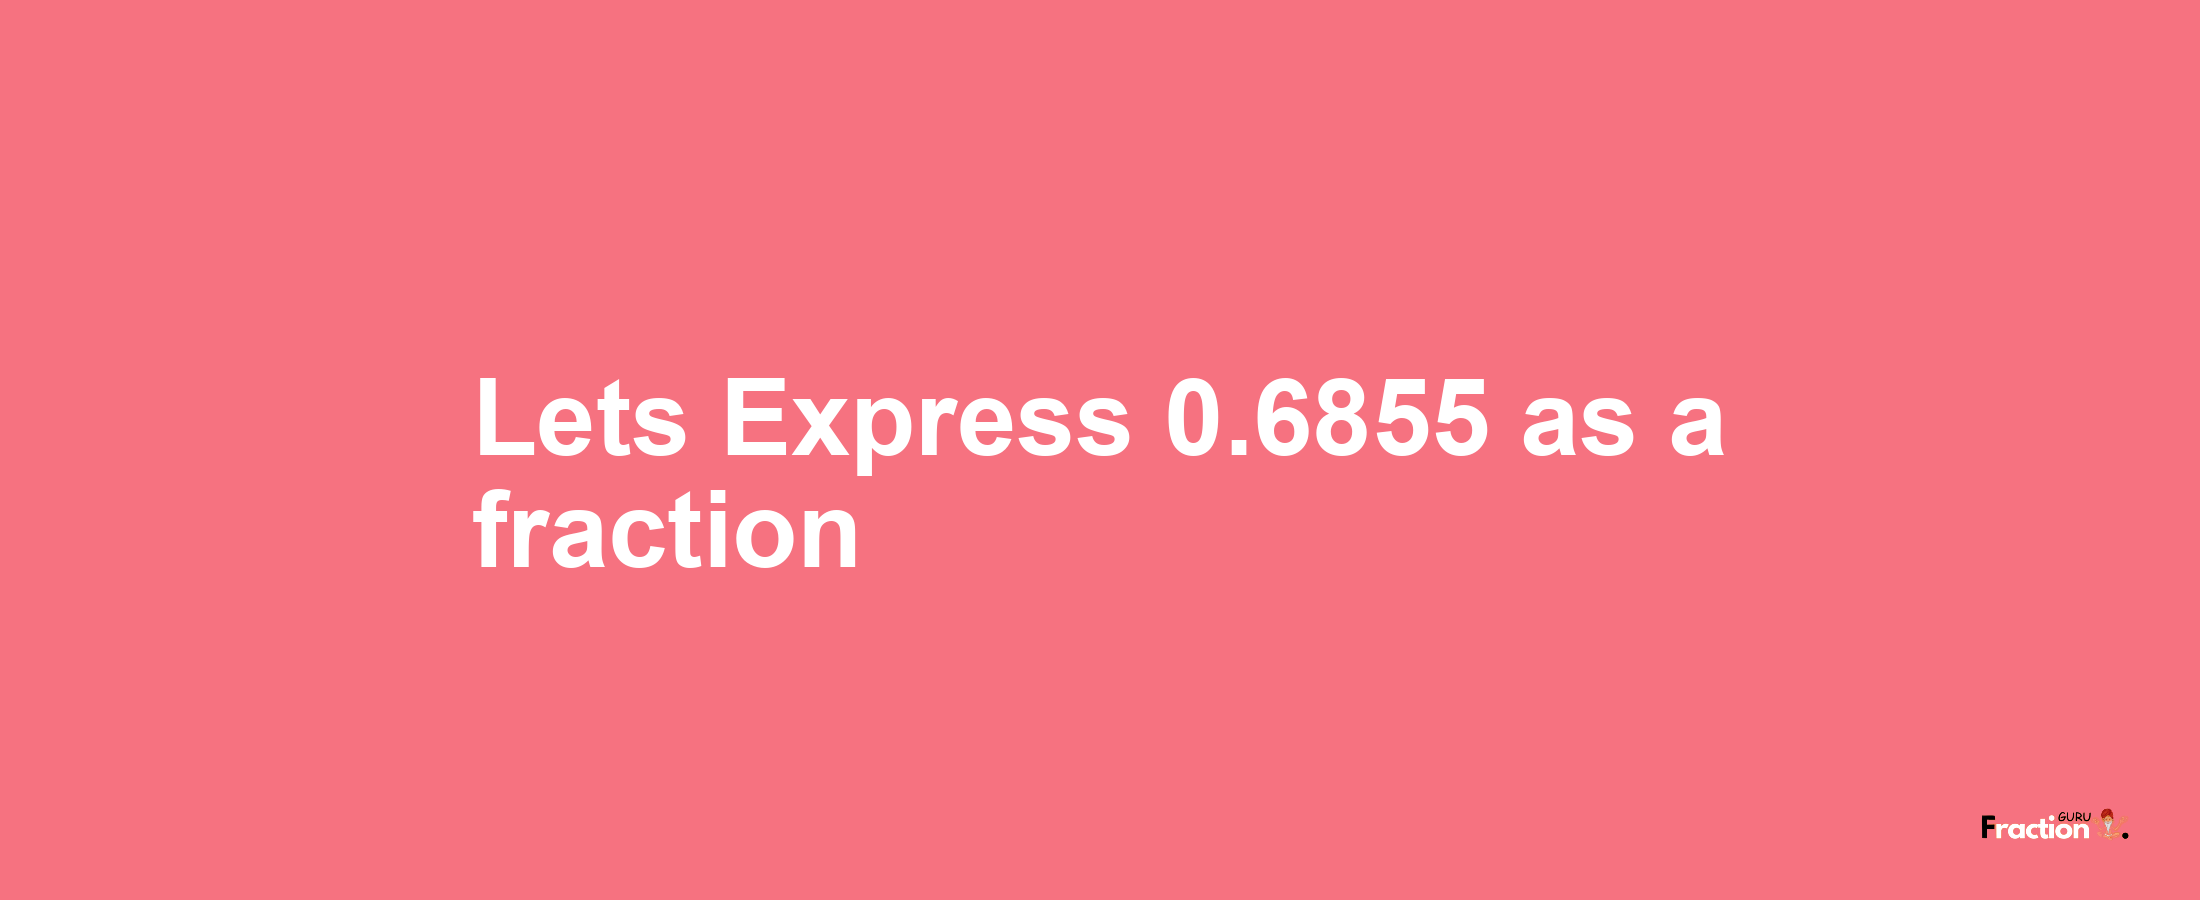 Lets Express 0.6855 as afraction